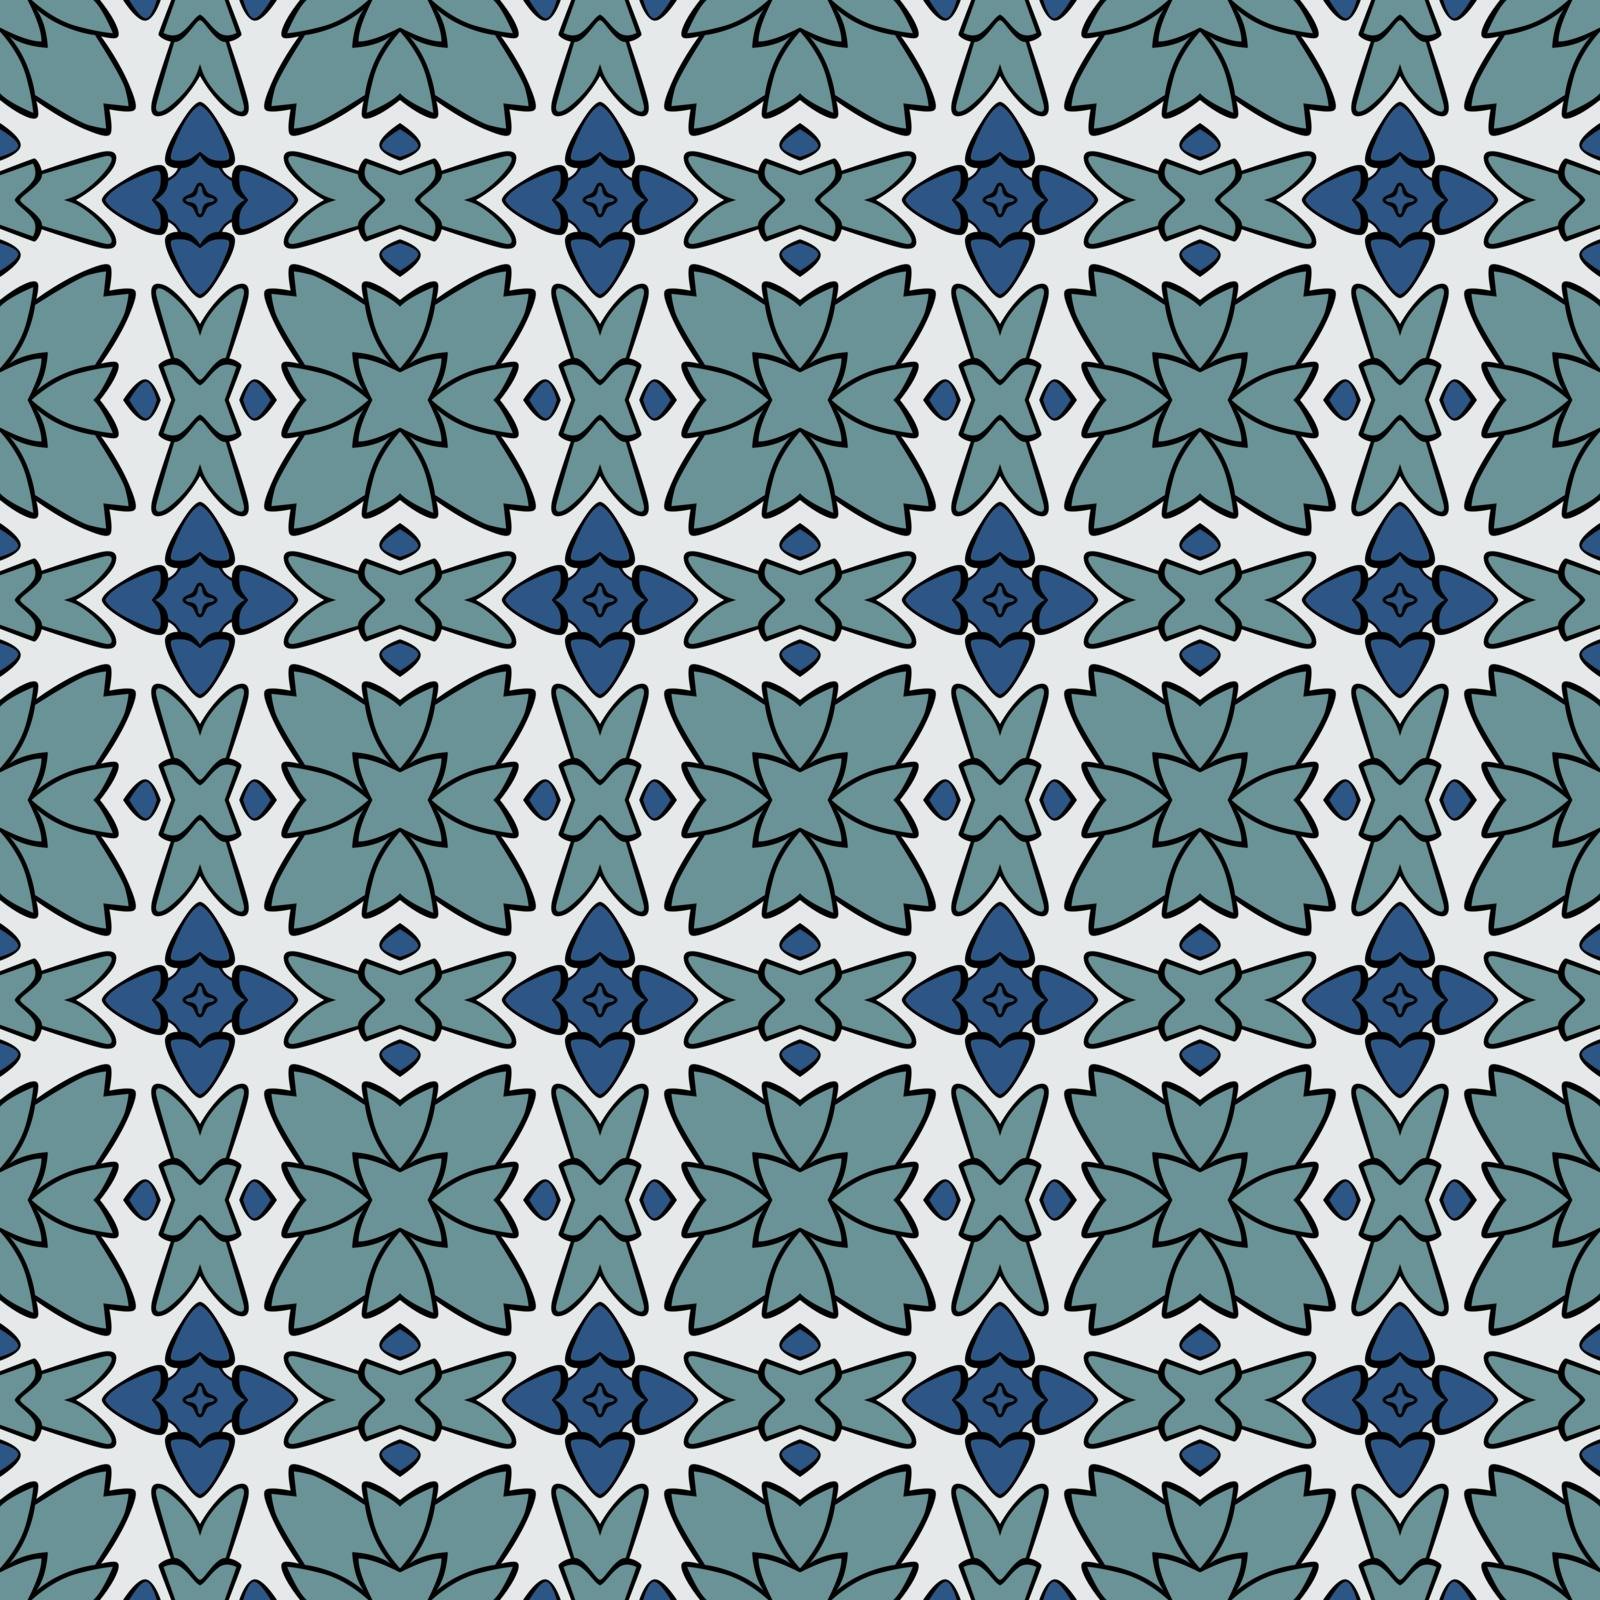 Seamless illustrated pattern made of abstract elements in white, turquoise, blue and black